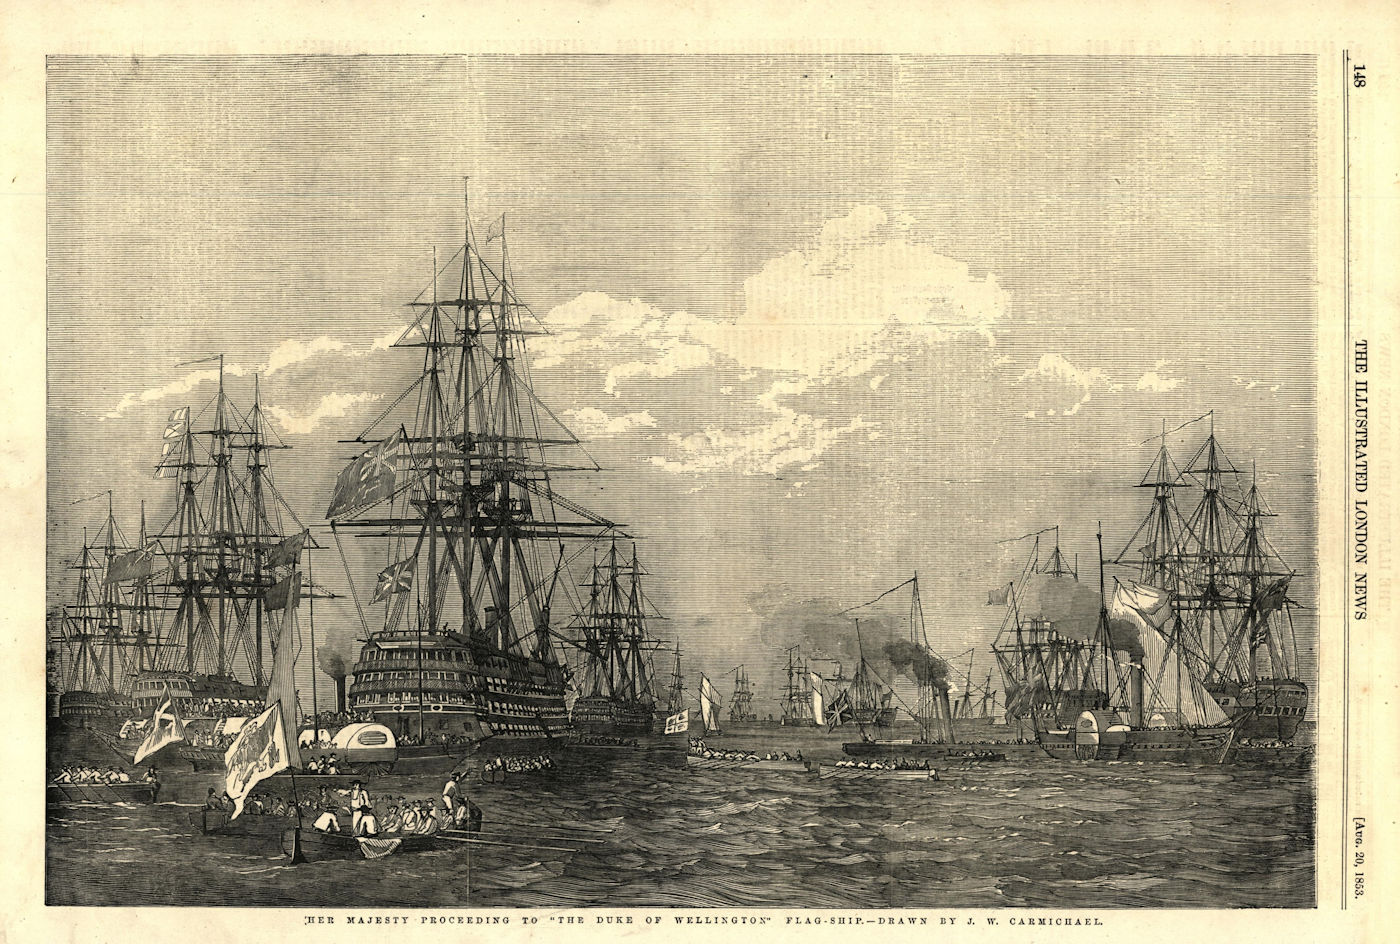 Associate Product Her Majesty proceeding to "The Duke of Wellington" flagship. Royal Navy 1853